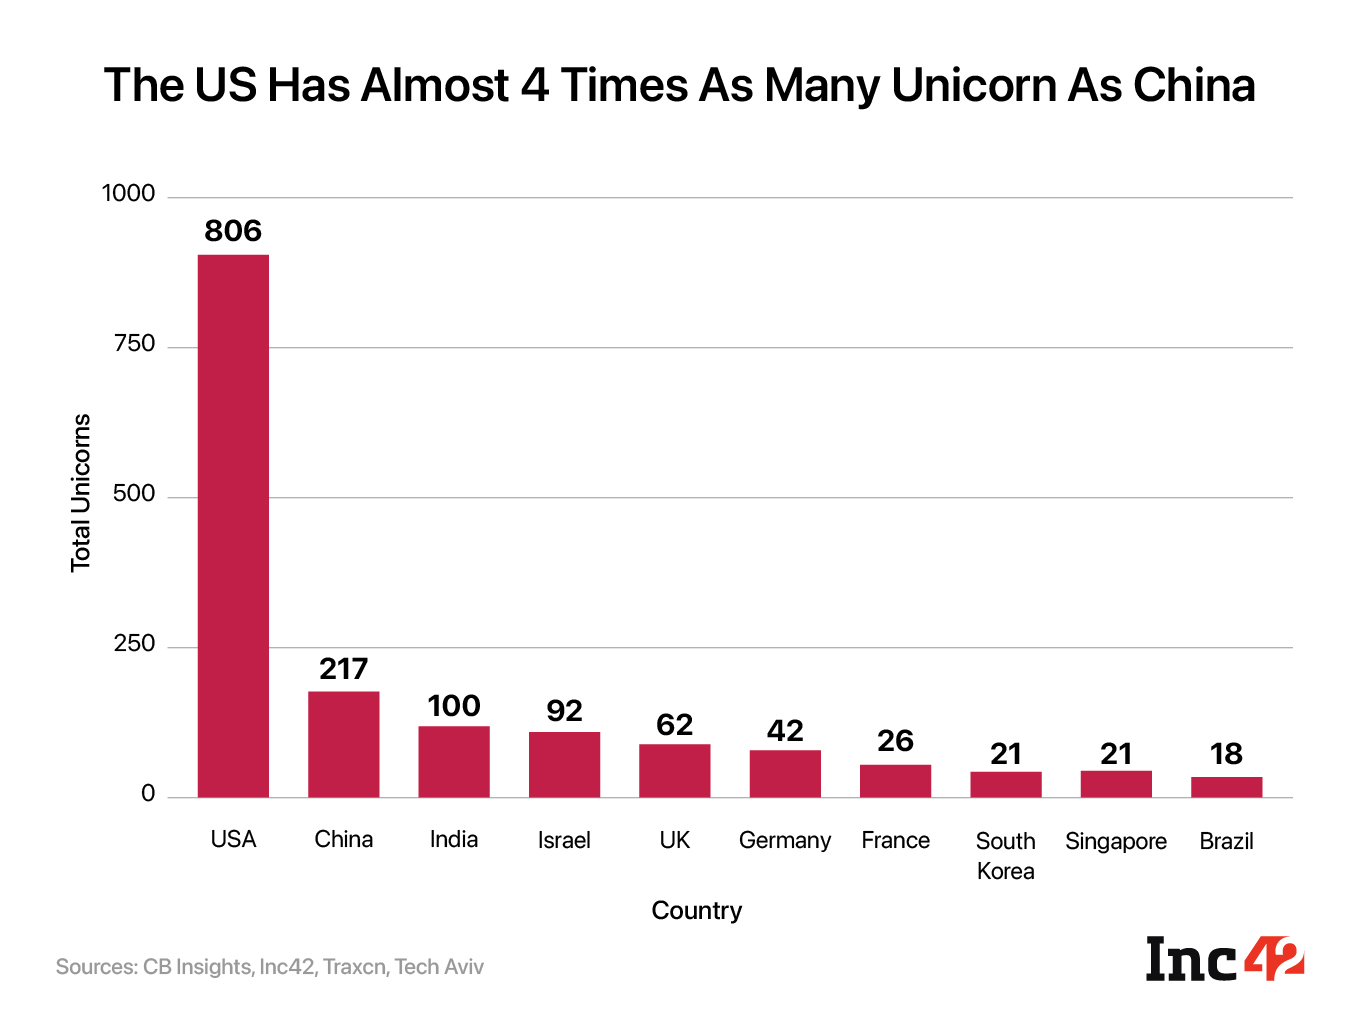 The US has almost 4 times as many unicorns as china